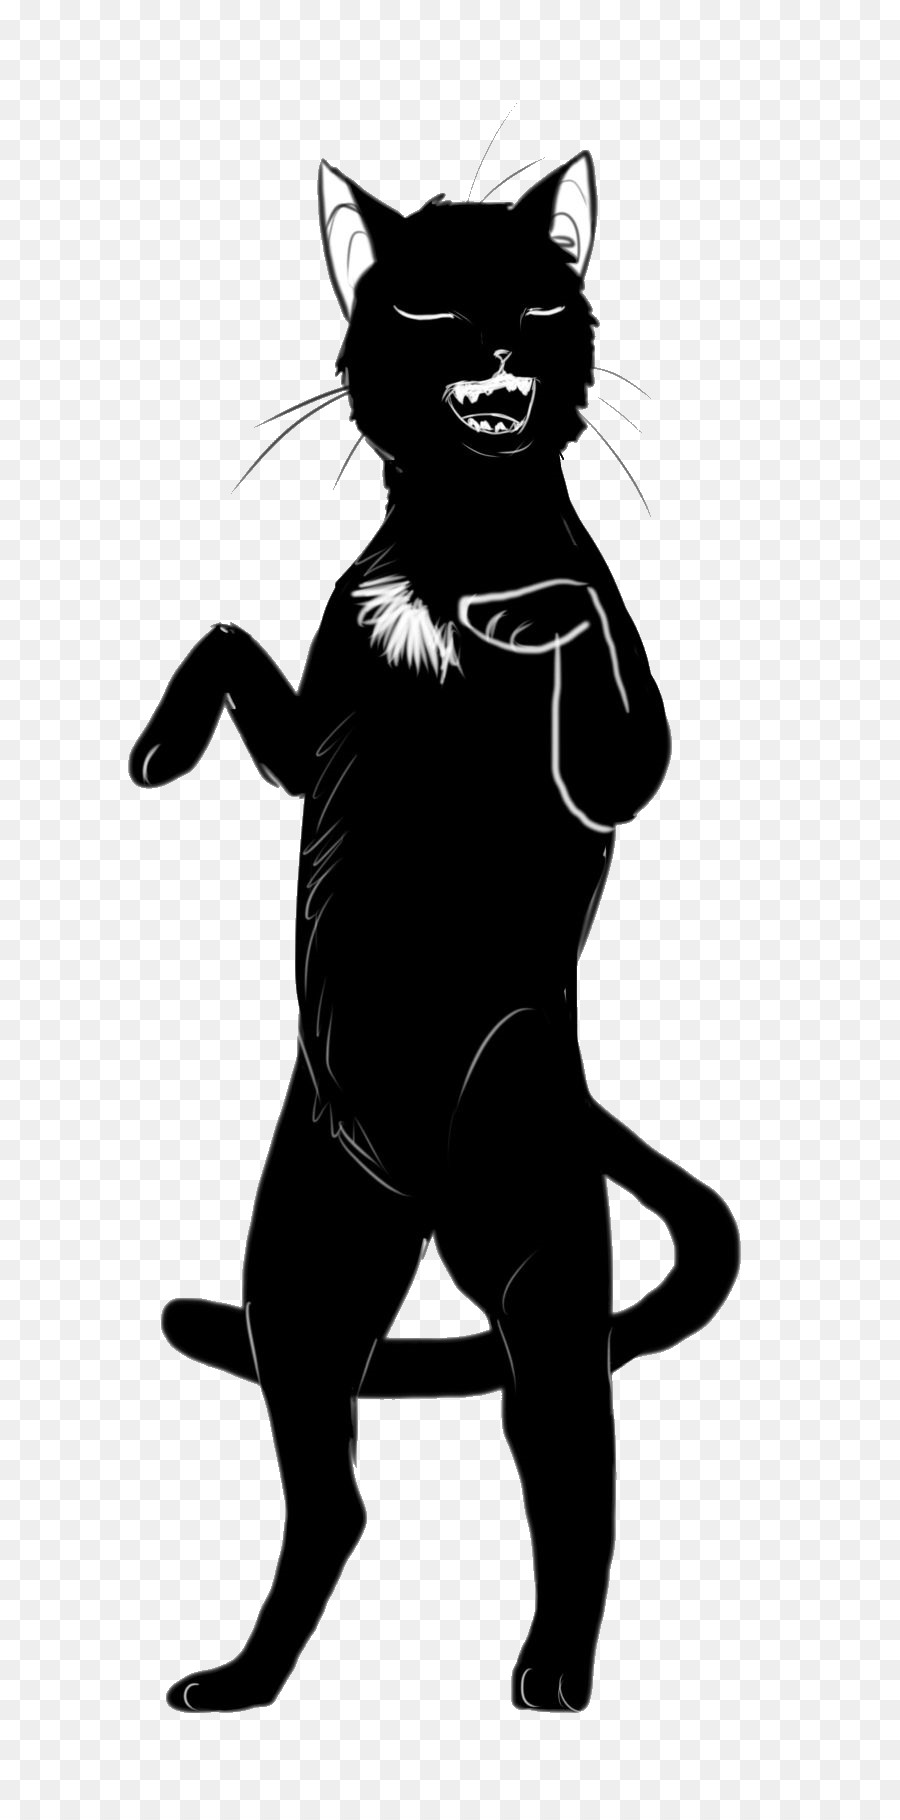 Whiskers Domestic short-haired cat Silhouette Clip art - Cat png download - 804*1820 - Free Transparent Whiskers png Download.